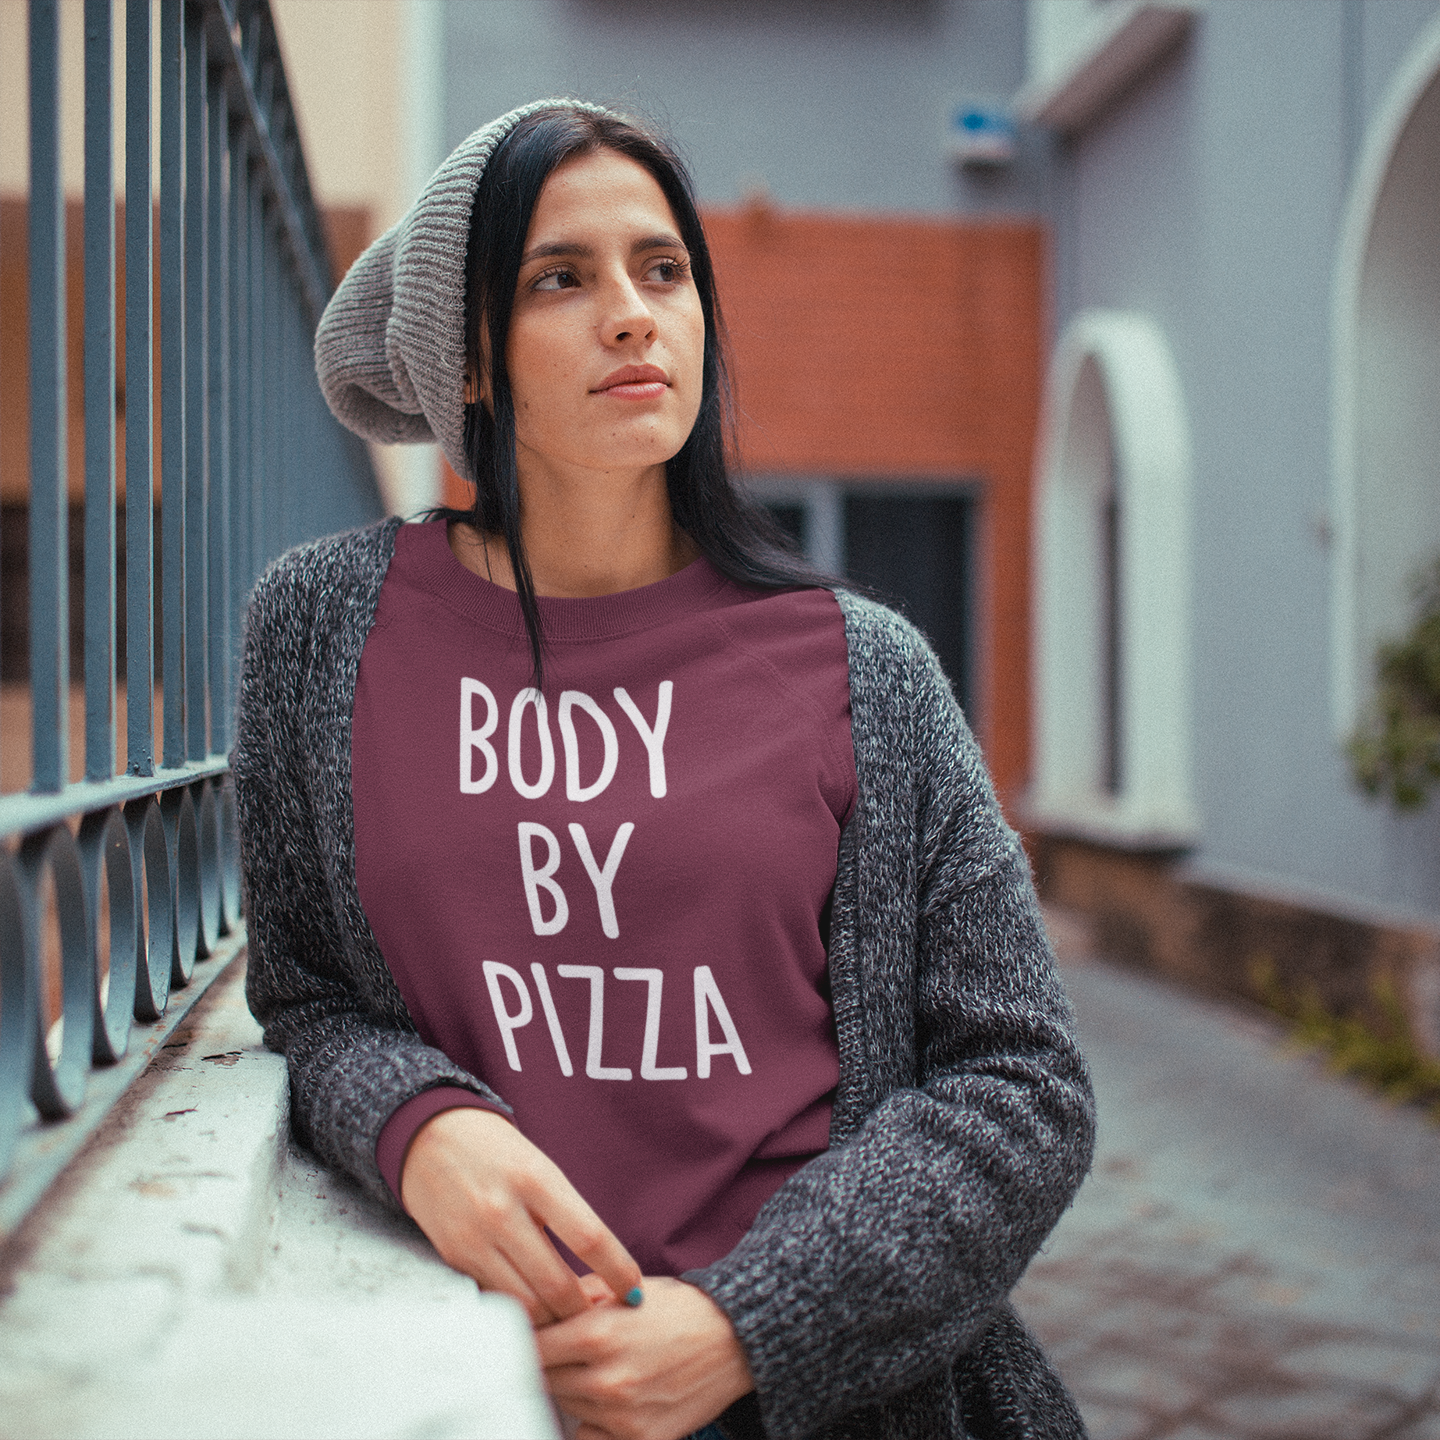 'Body by pizza' sweater